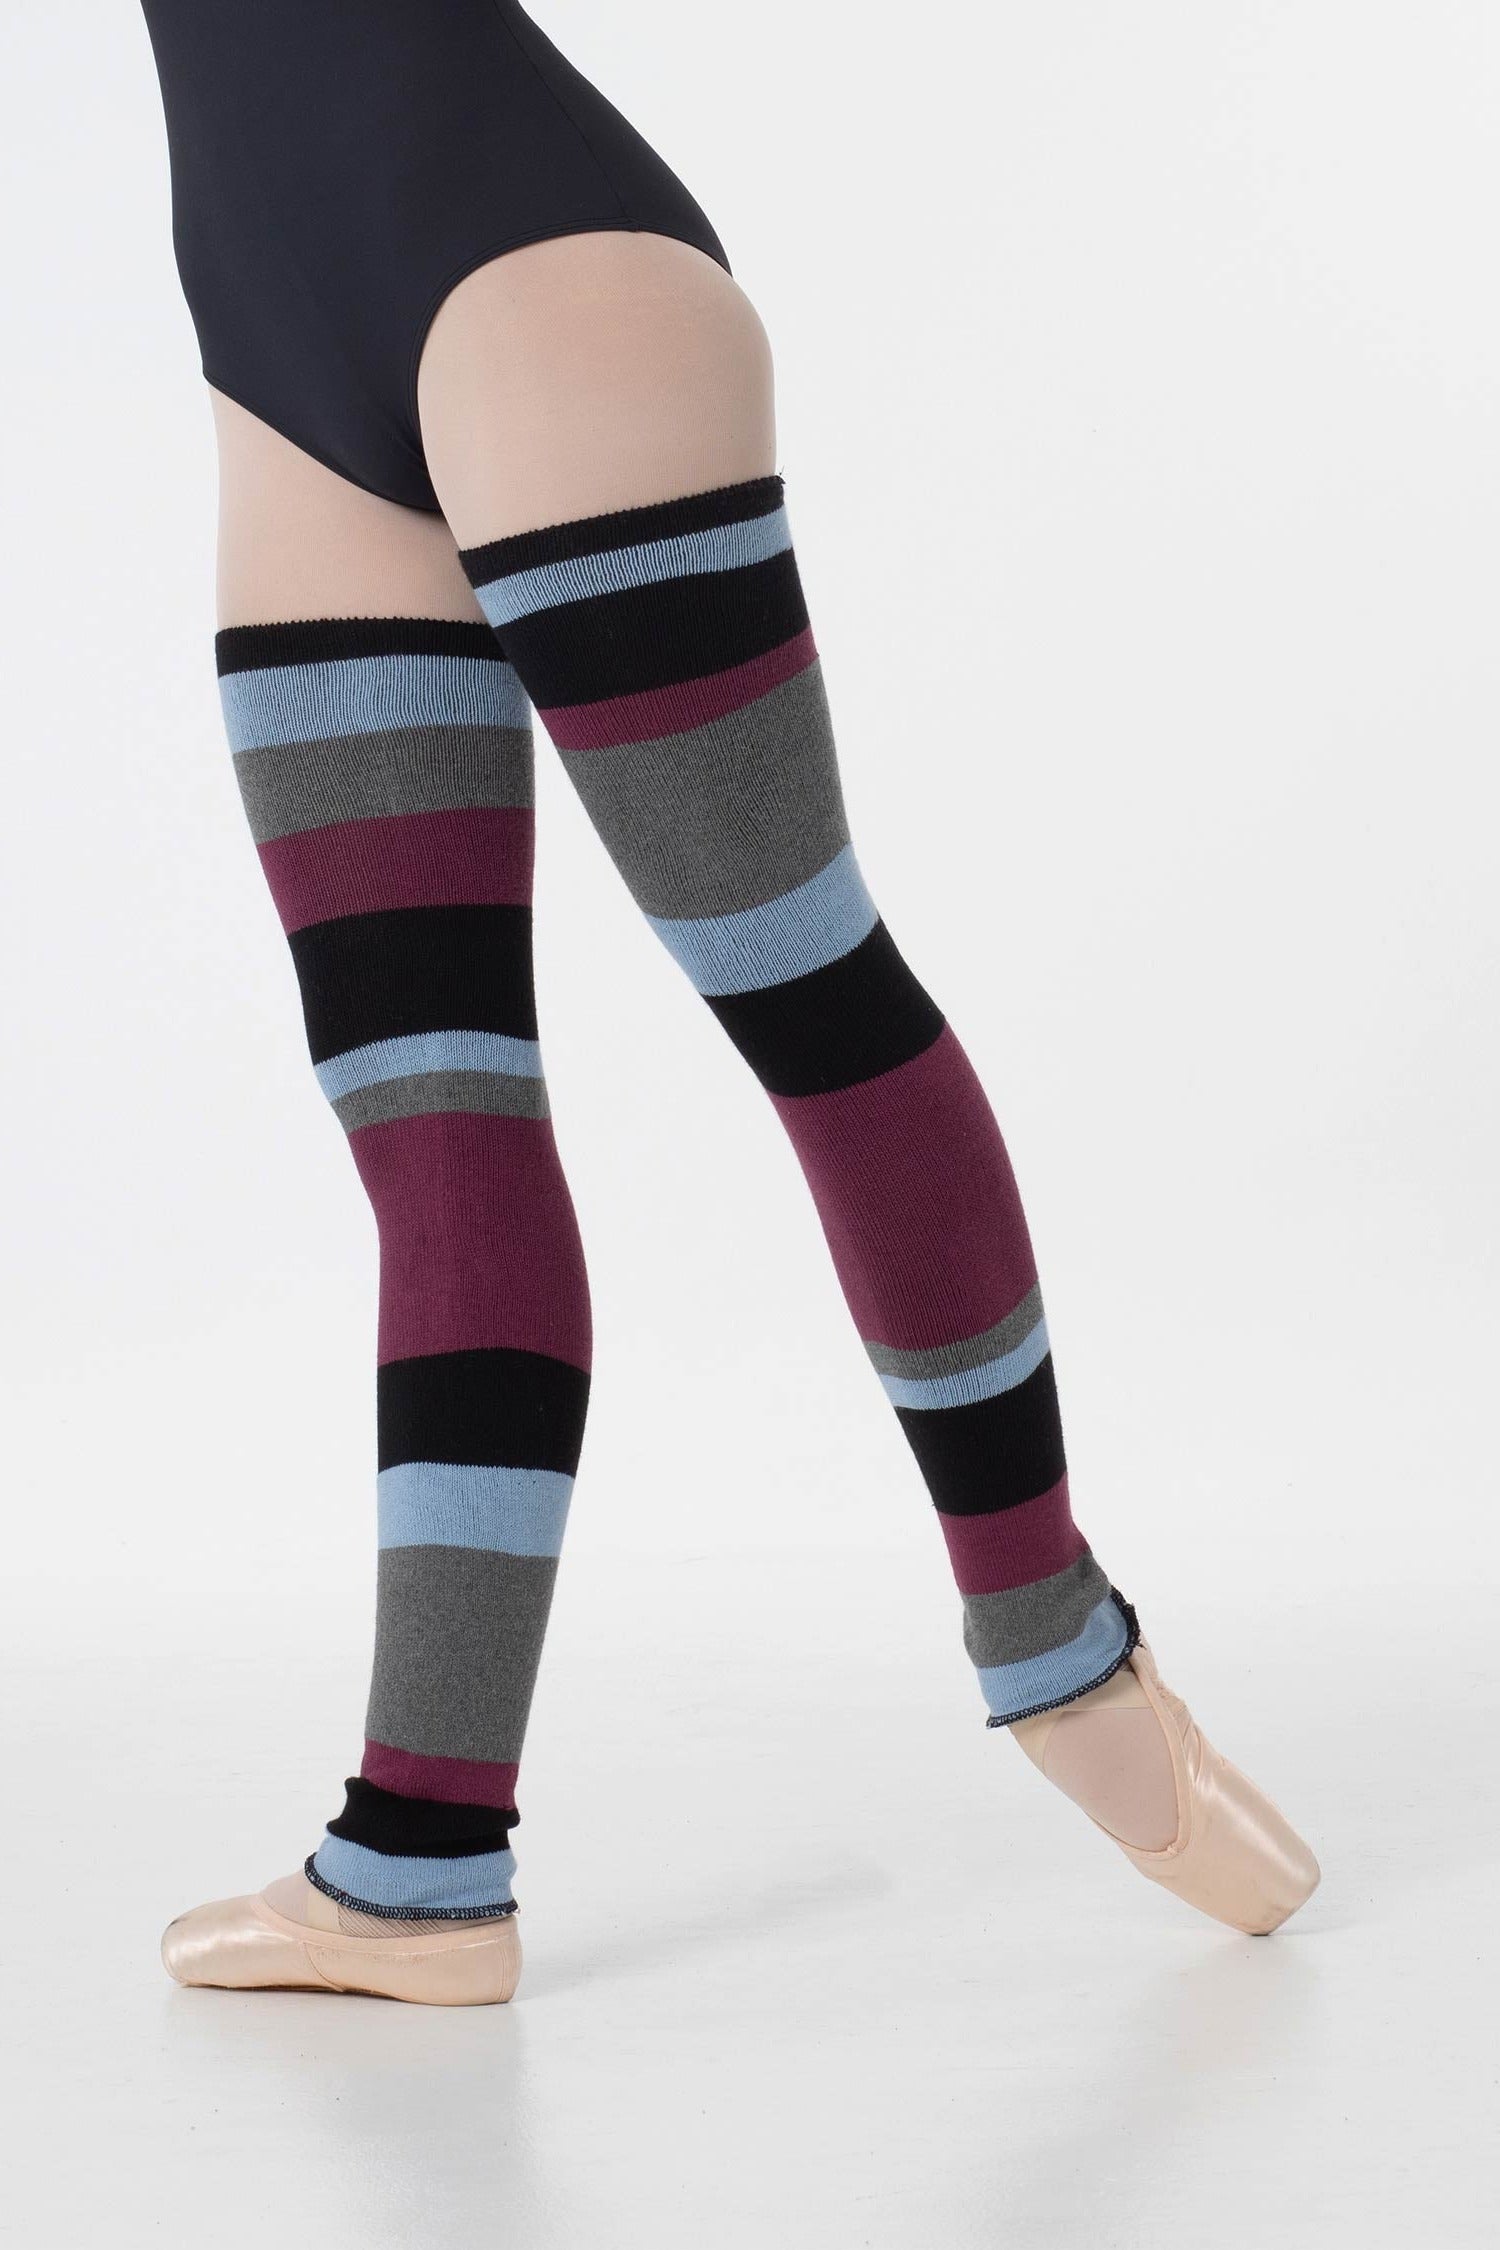 Intermezzo long legwarmers Maxiband in black, blue and wine from The Collective Dancewear